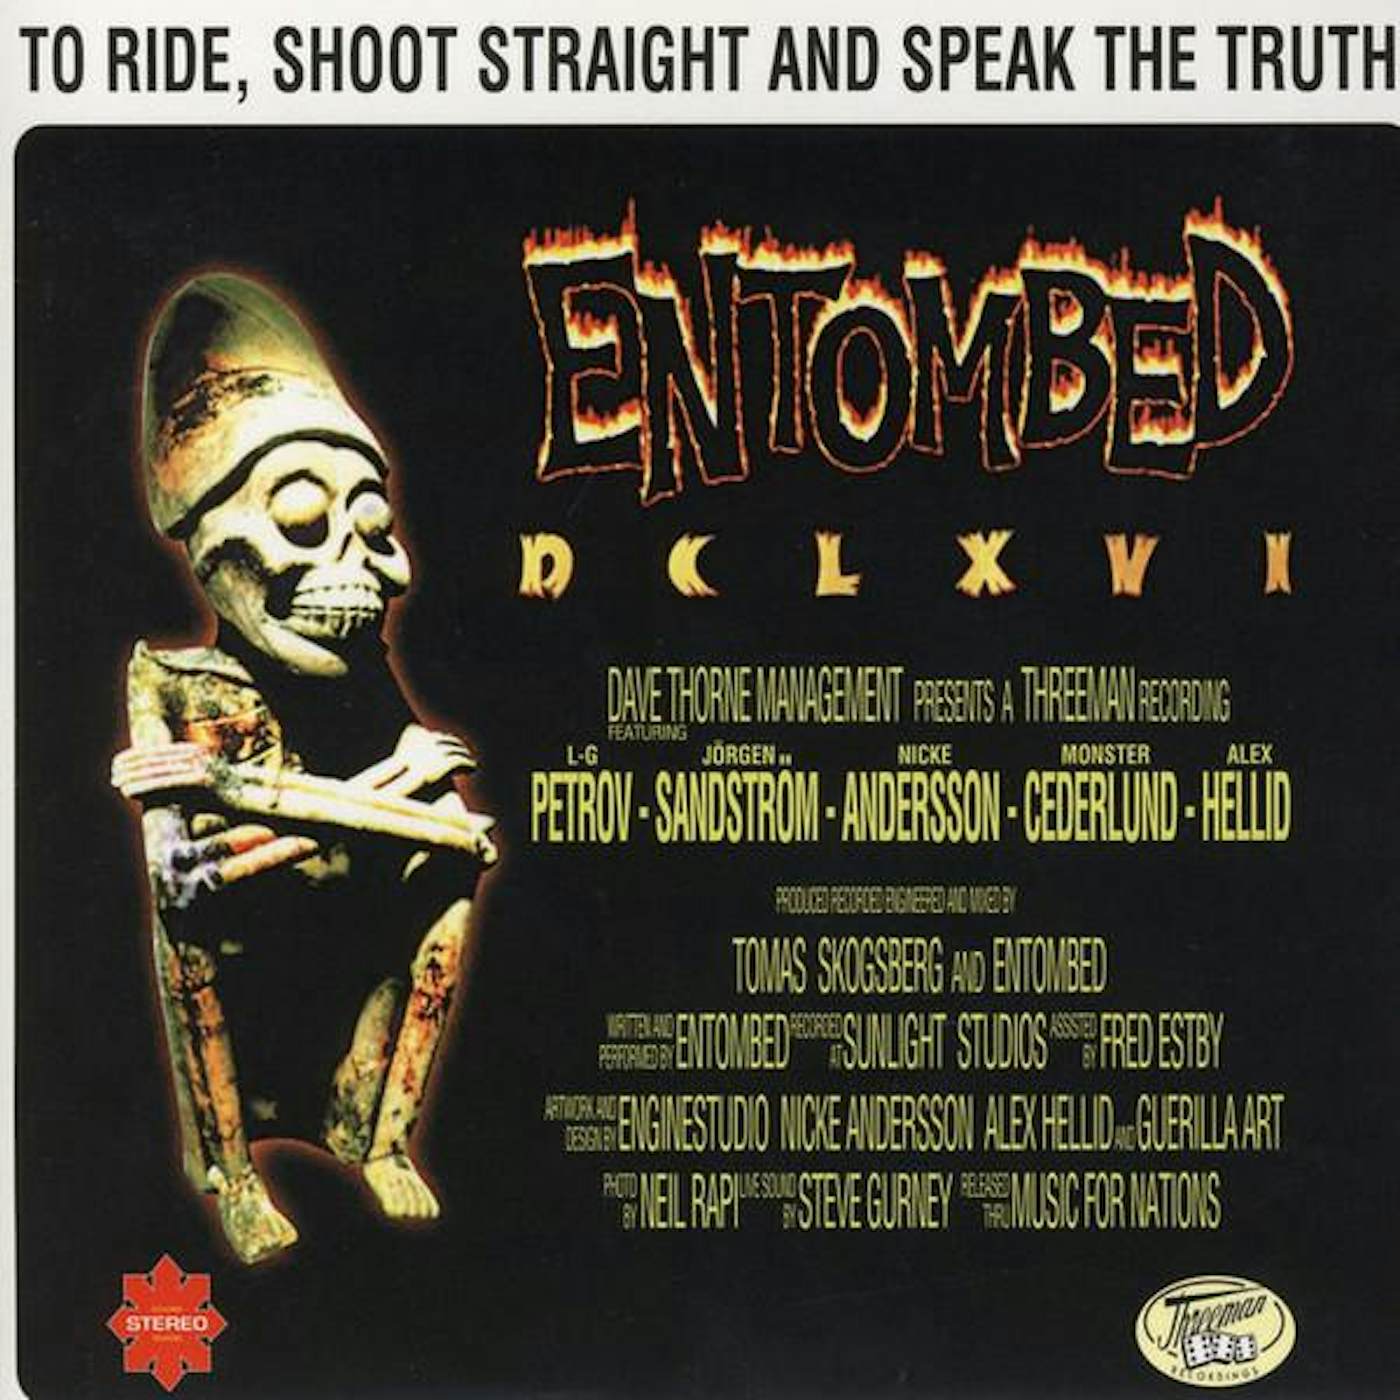 Entombed DCLXVI - TO RIDE, SHOOT STRAIGHT & SPEAK THE TRUTH CD